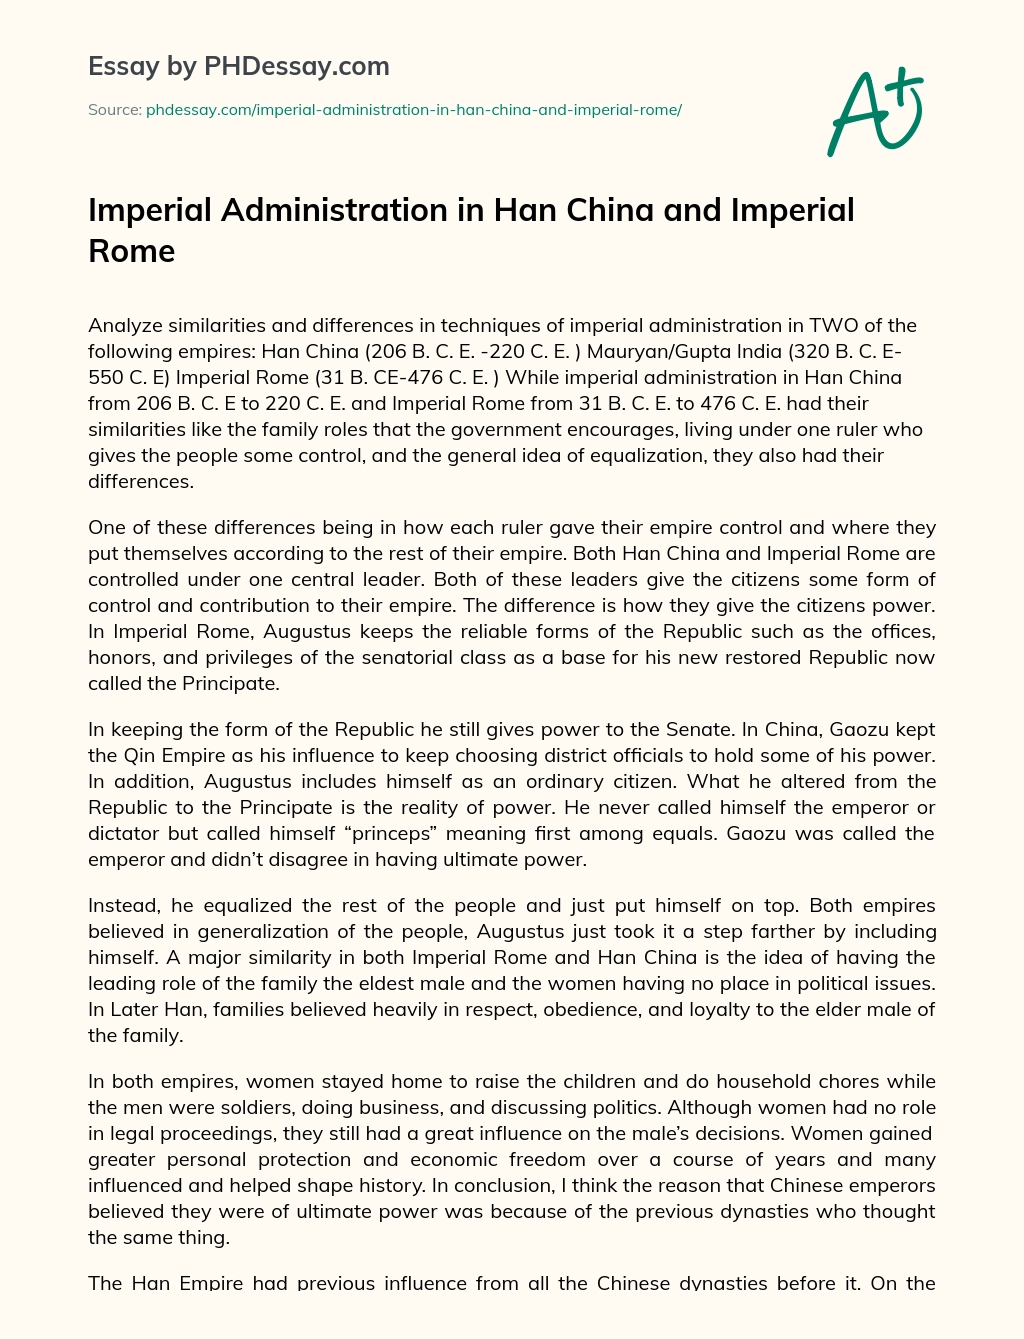 Imperial Administration in Han China and Imperial Rome essay